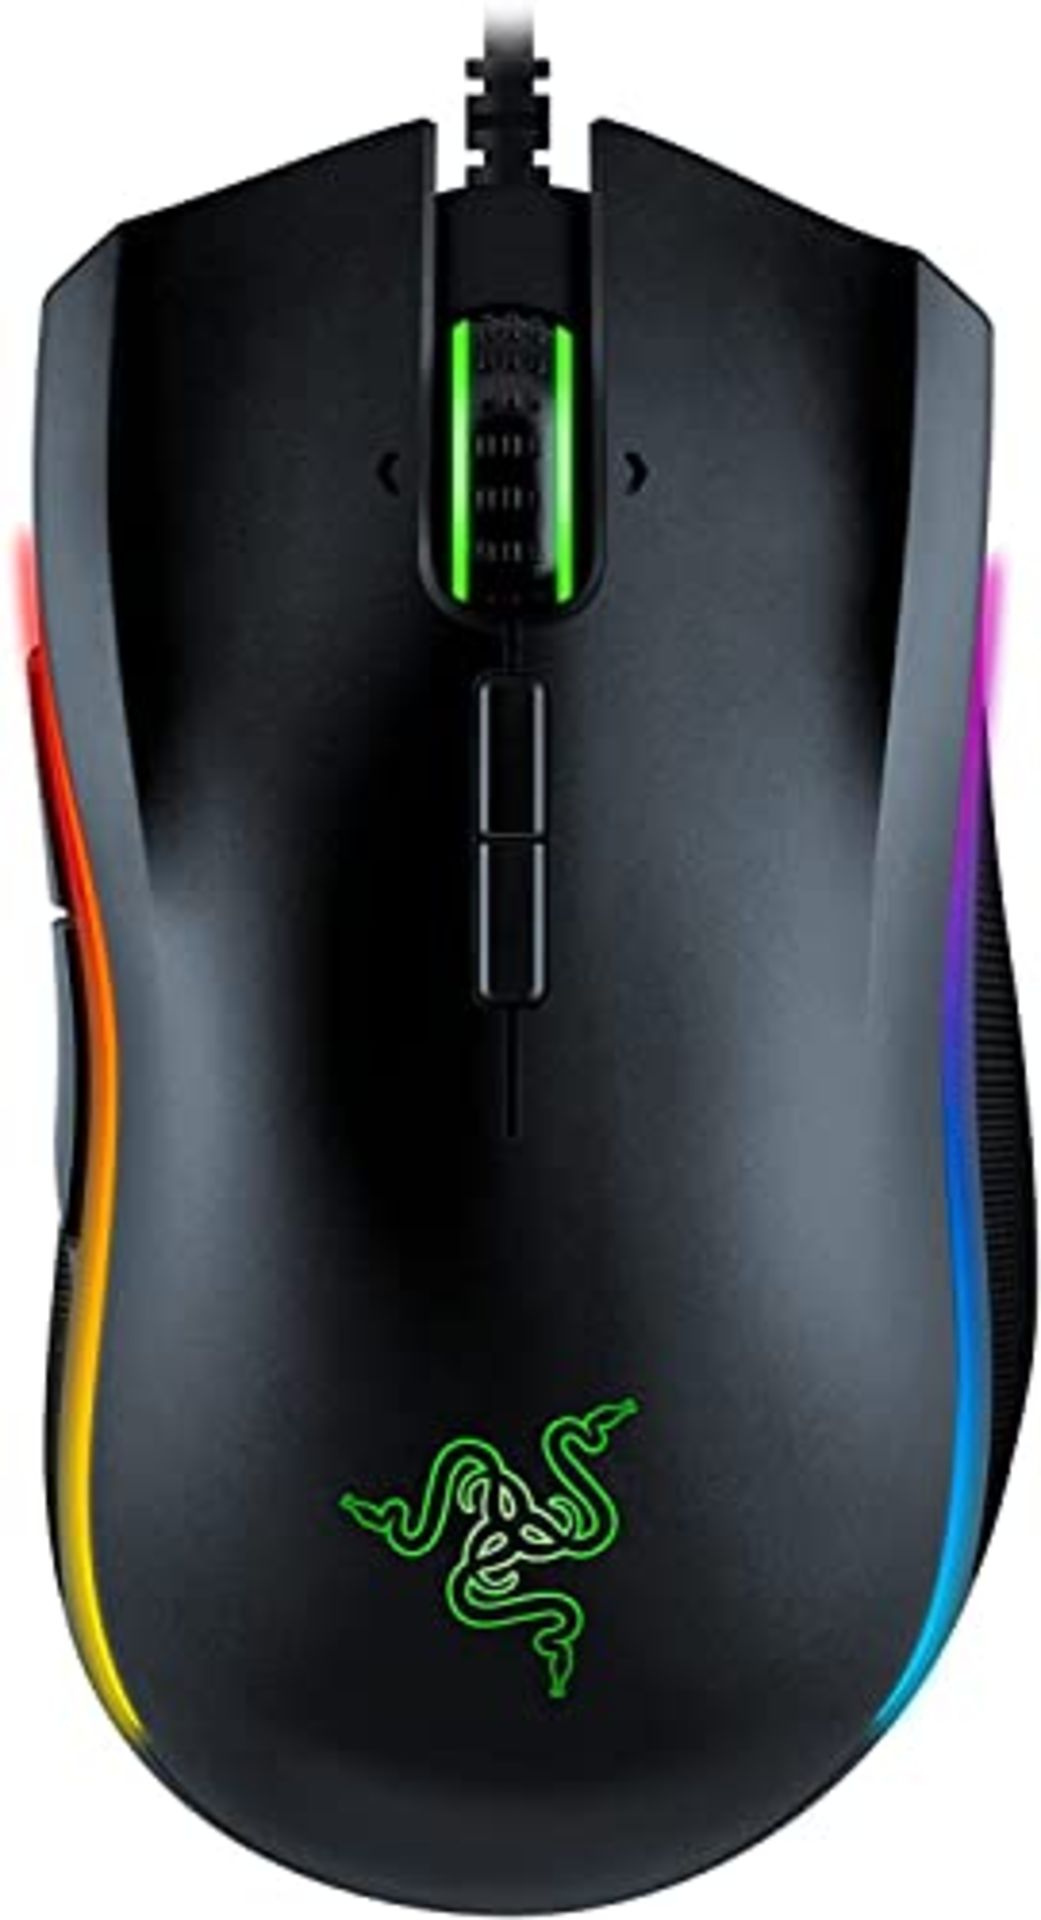 RRP £56.00 Razer Mamba Elite Gaming Mouse with 16.000 DPI 5G Optical Sensor, 9 Programmable Butto